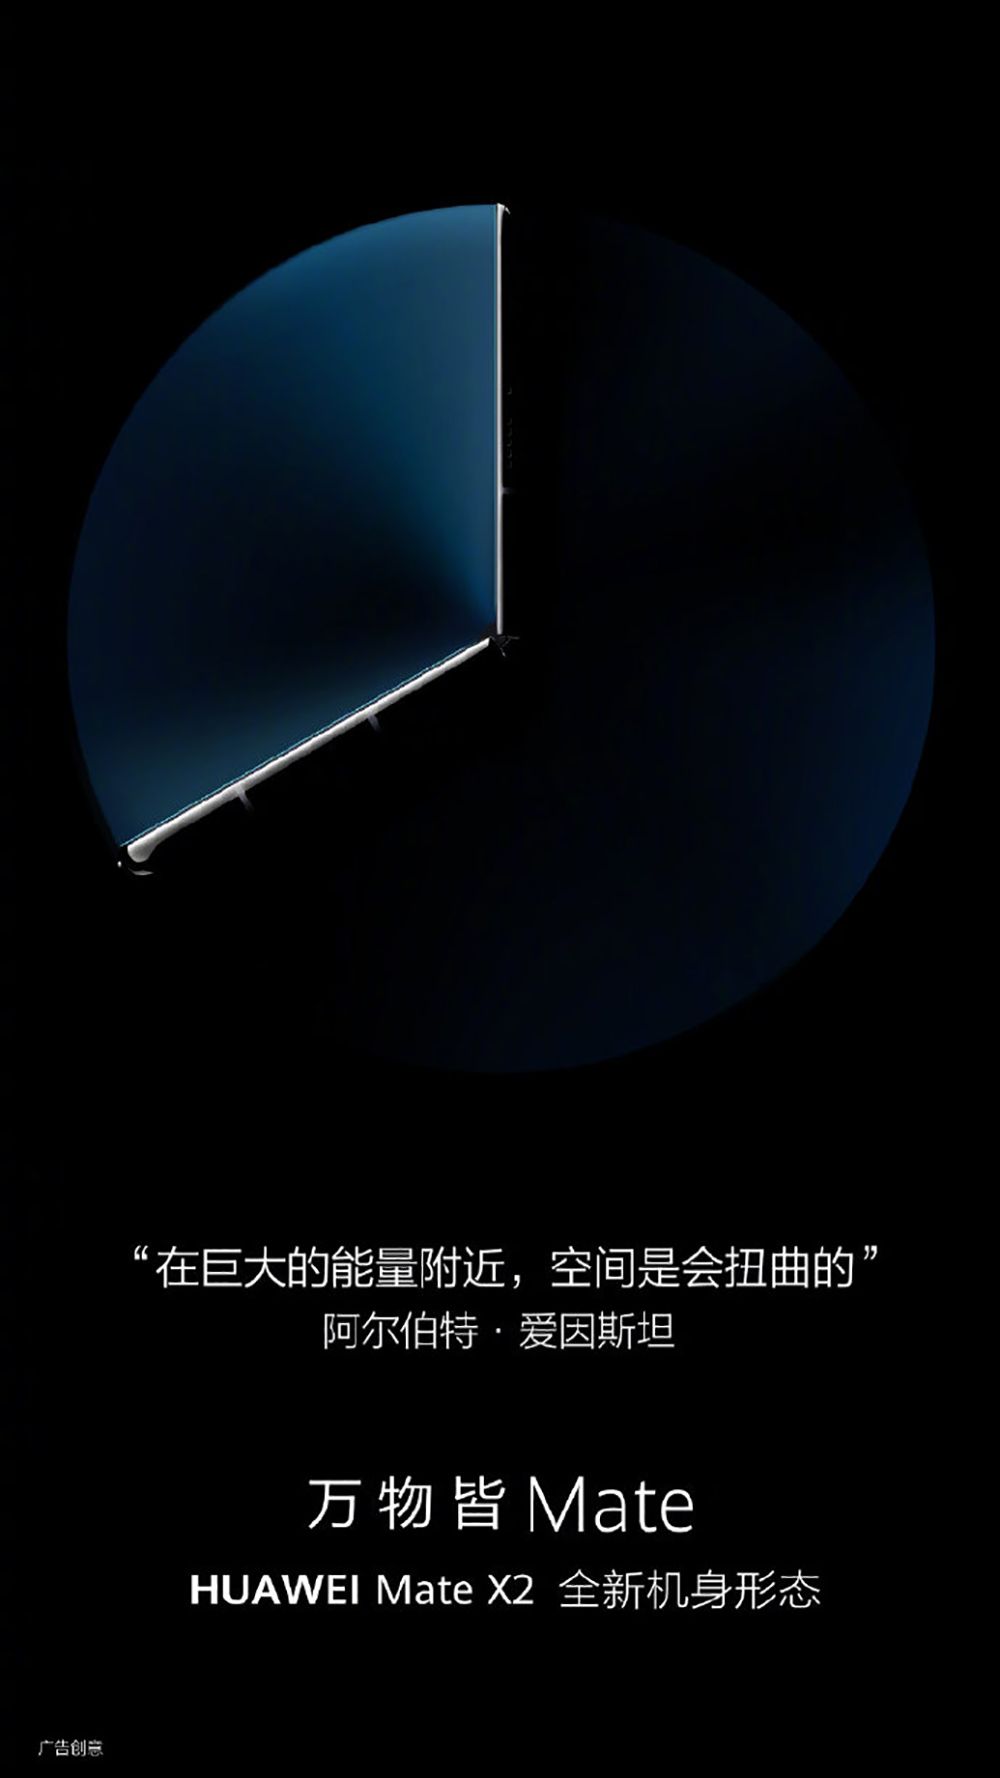 Huawei Mate X2 teaser confirms foldable screen is on the inside this time photo 2